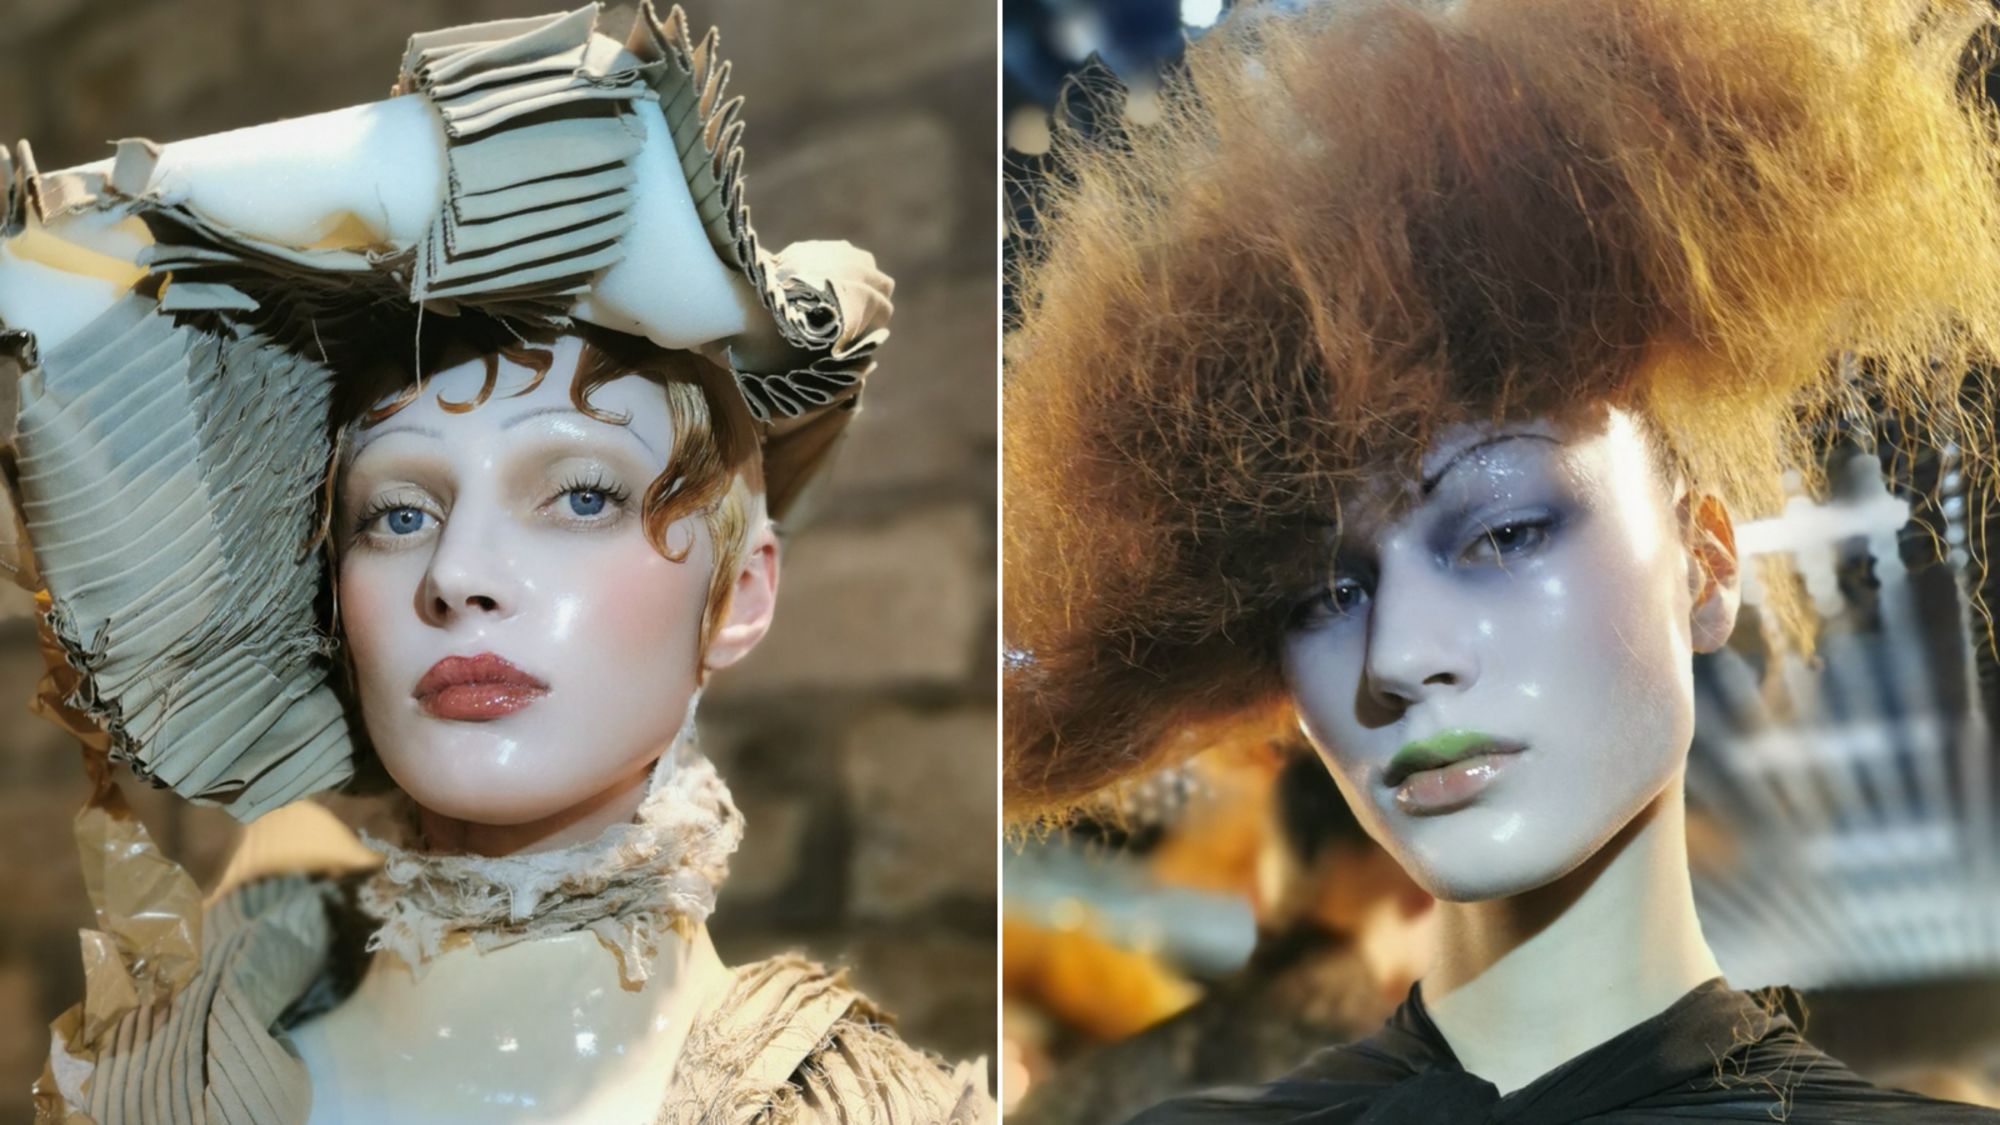 The internet has been awash with speculation about how Pat McGrath created these ethereal "china doll" makeup looks for the Maison Margiela couture show in Paris.